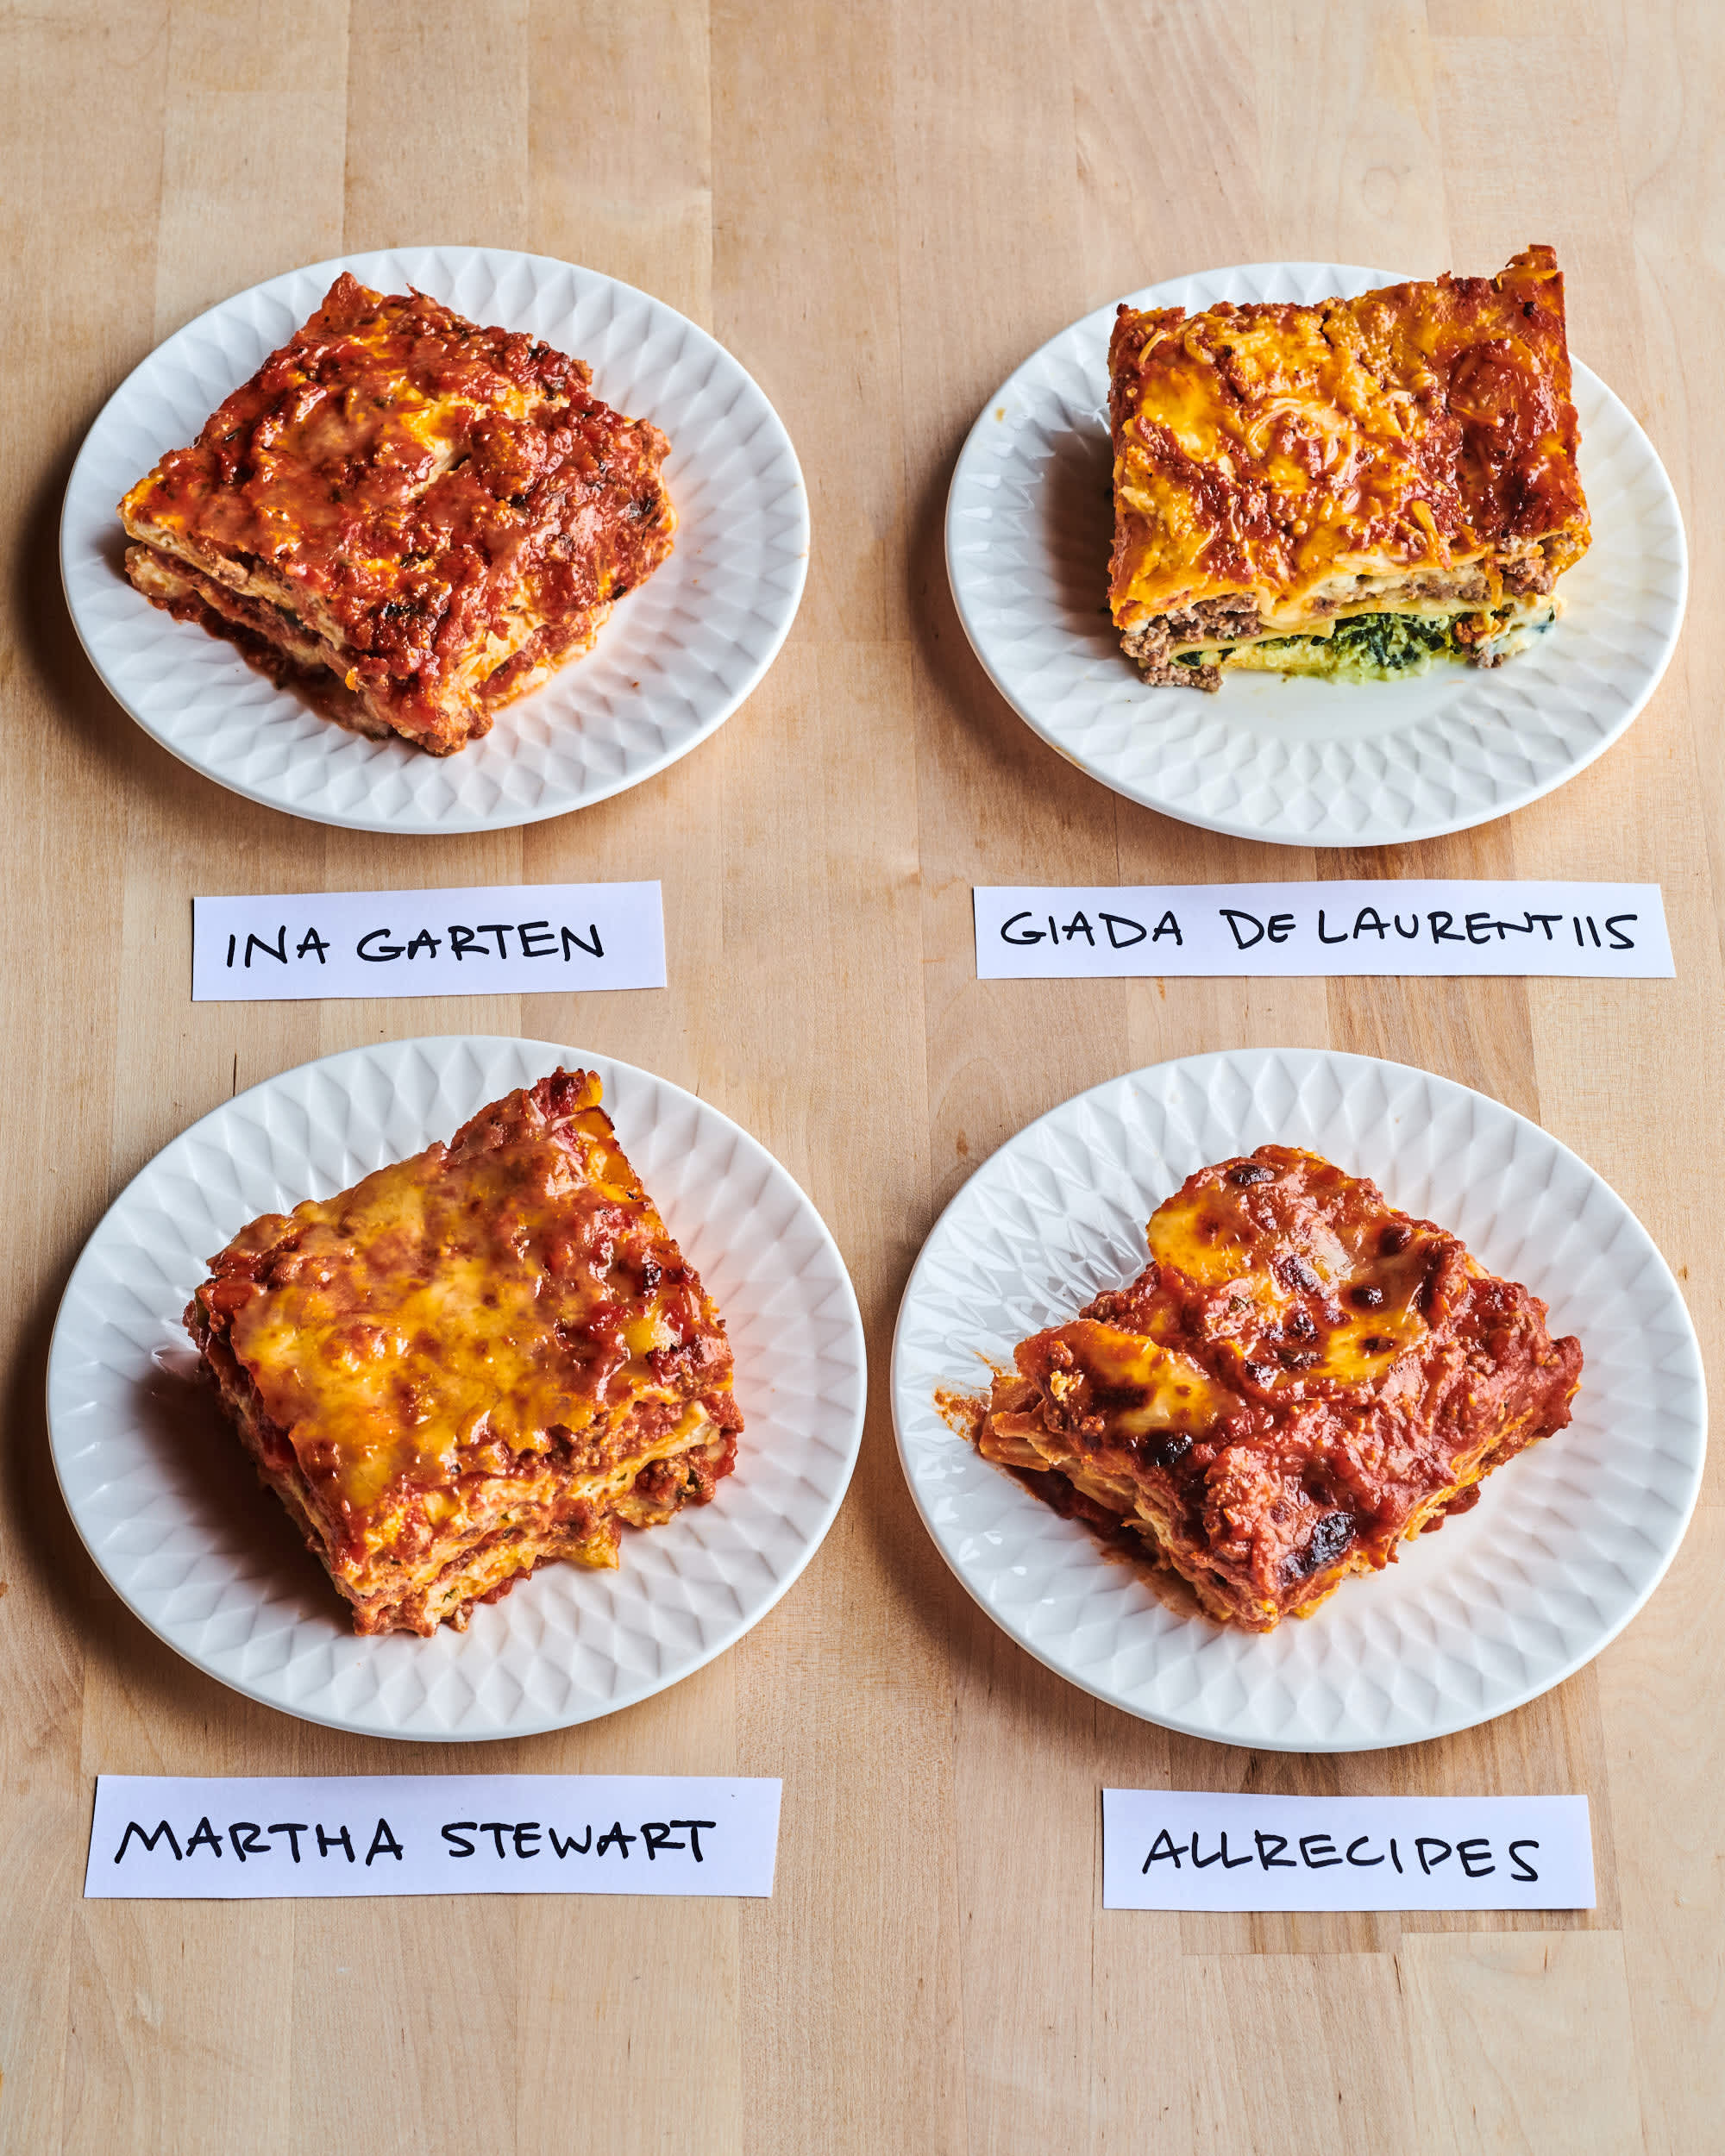 The Best Lasagna Recipe (We Tested 4 Famous Options) | The Kitchn